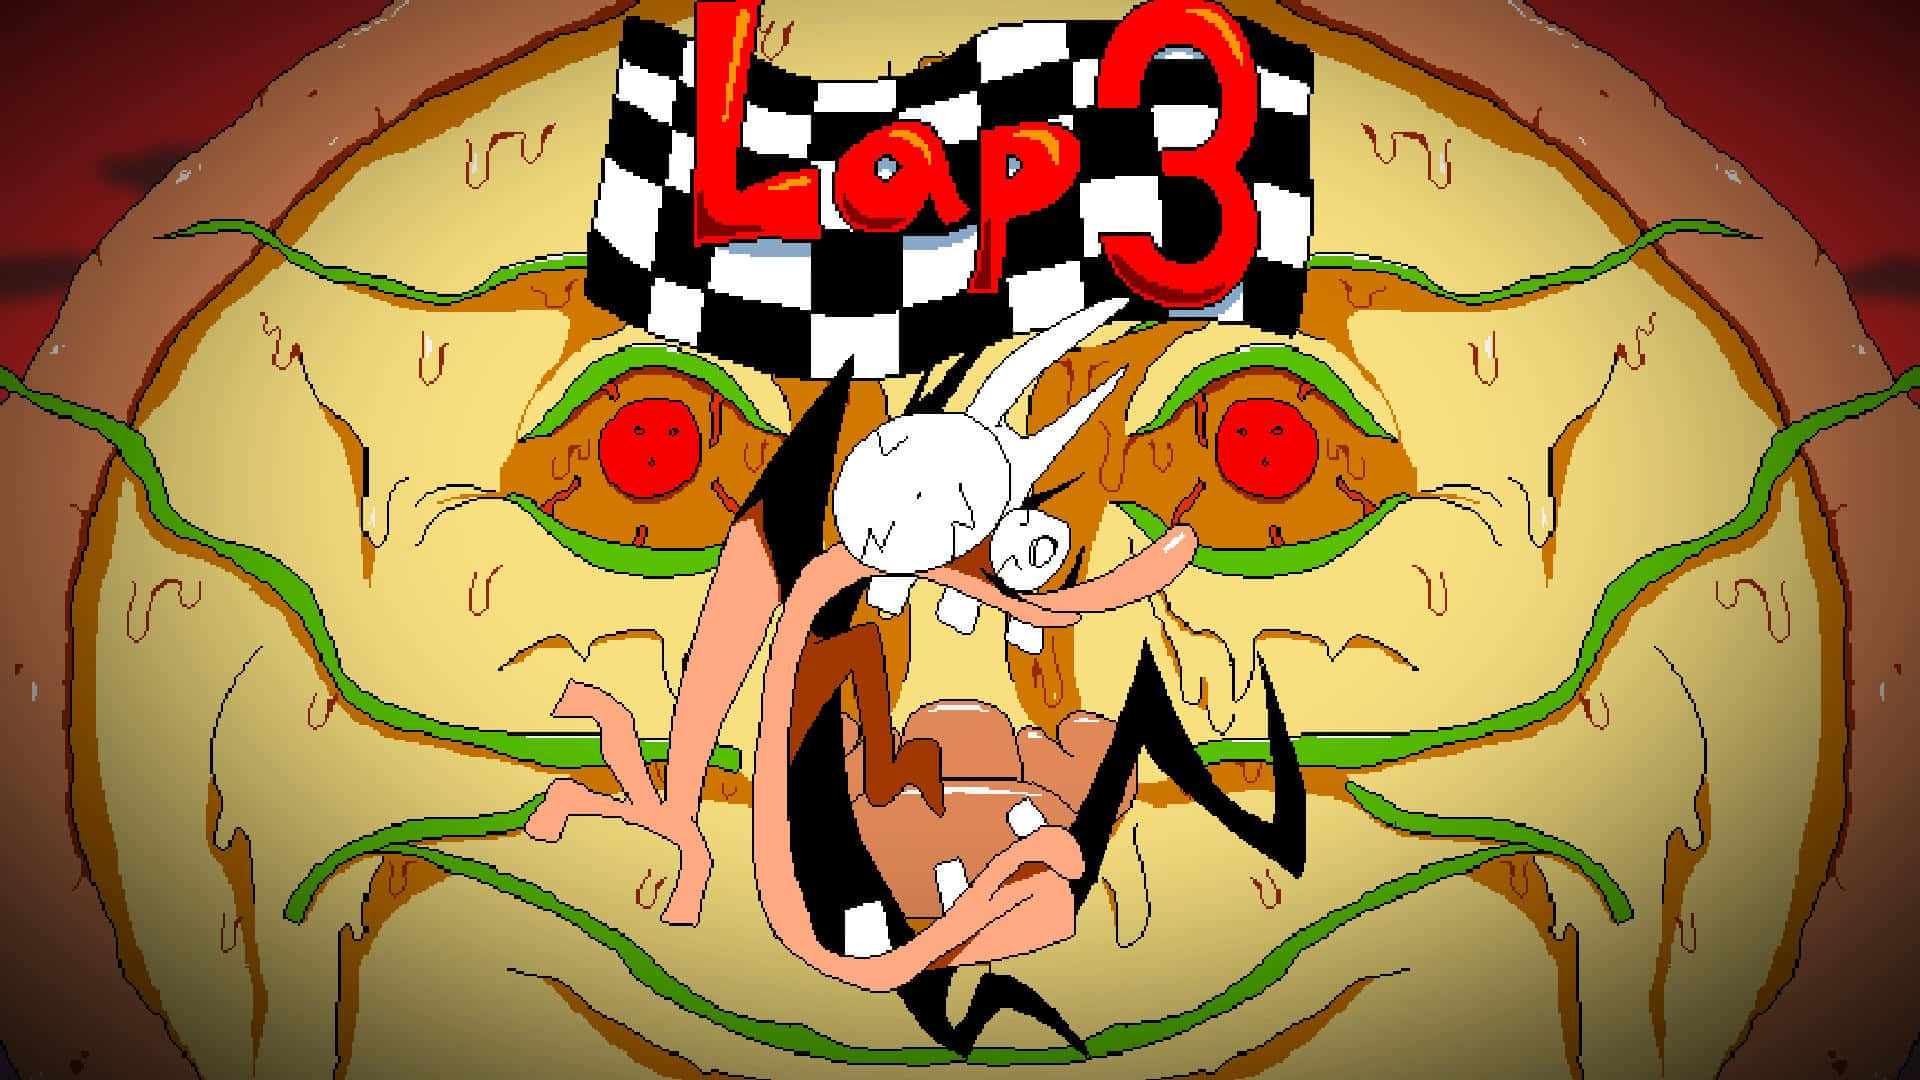 Pizza Tower_ Lap3_ Animated Character Wallpaper